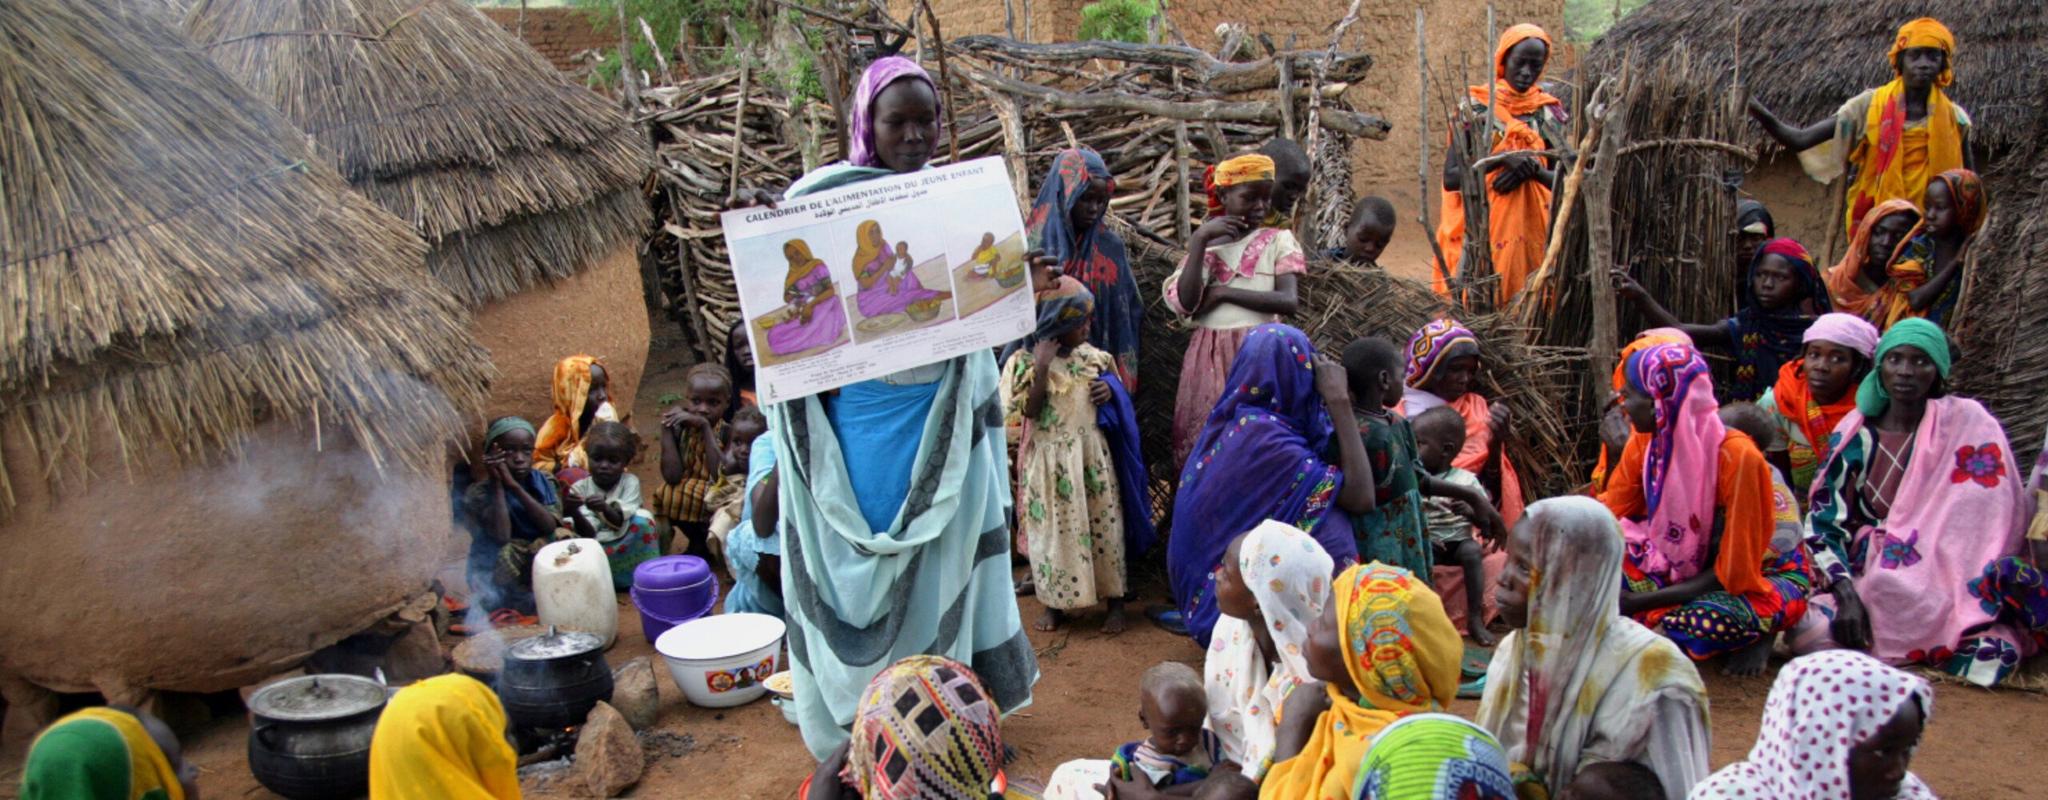 A health educator talks to women about mother and child healthcare in a village in Chad